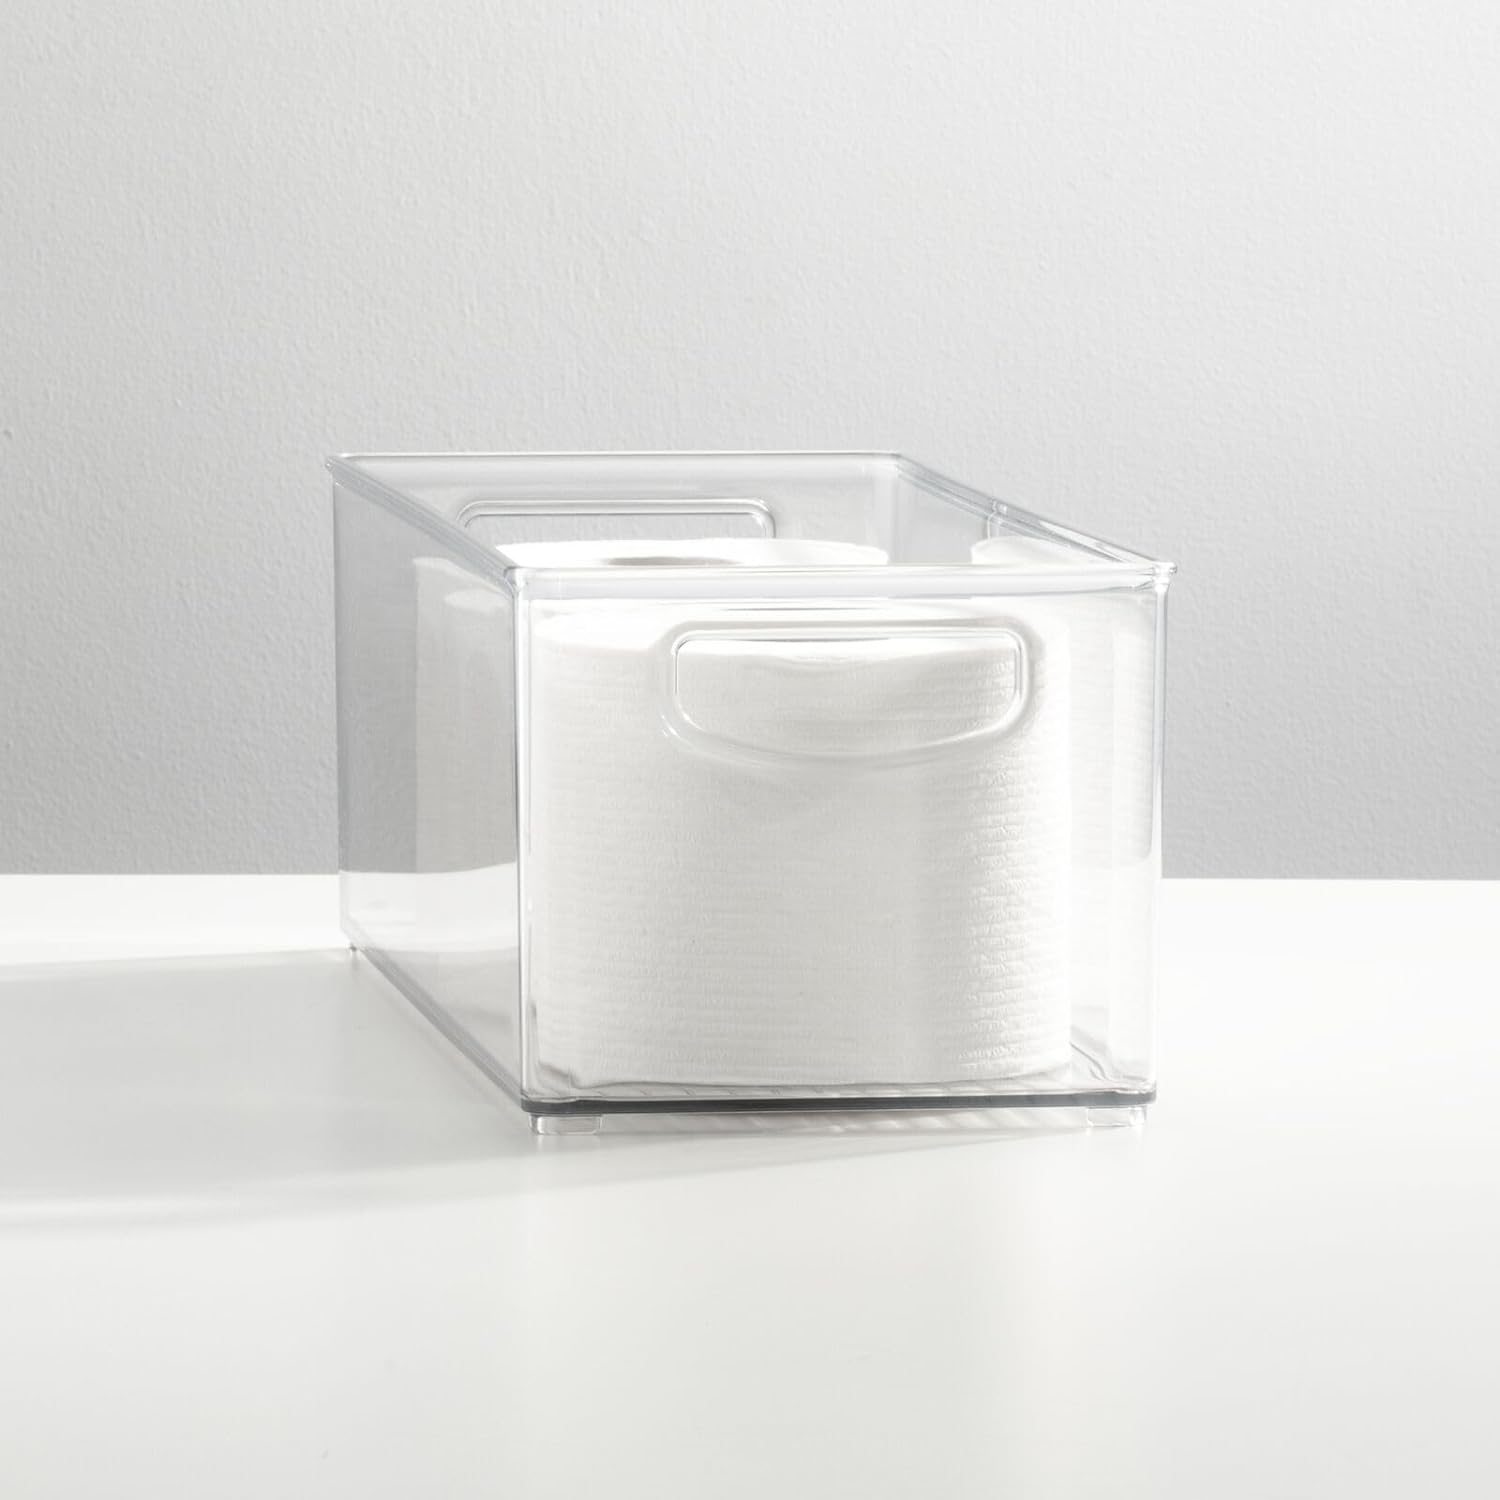 mDesign Plastic Toiletry Organizer for Bathroom - A Must-Have Storage Solution